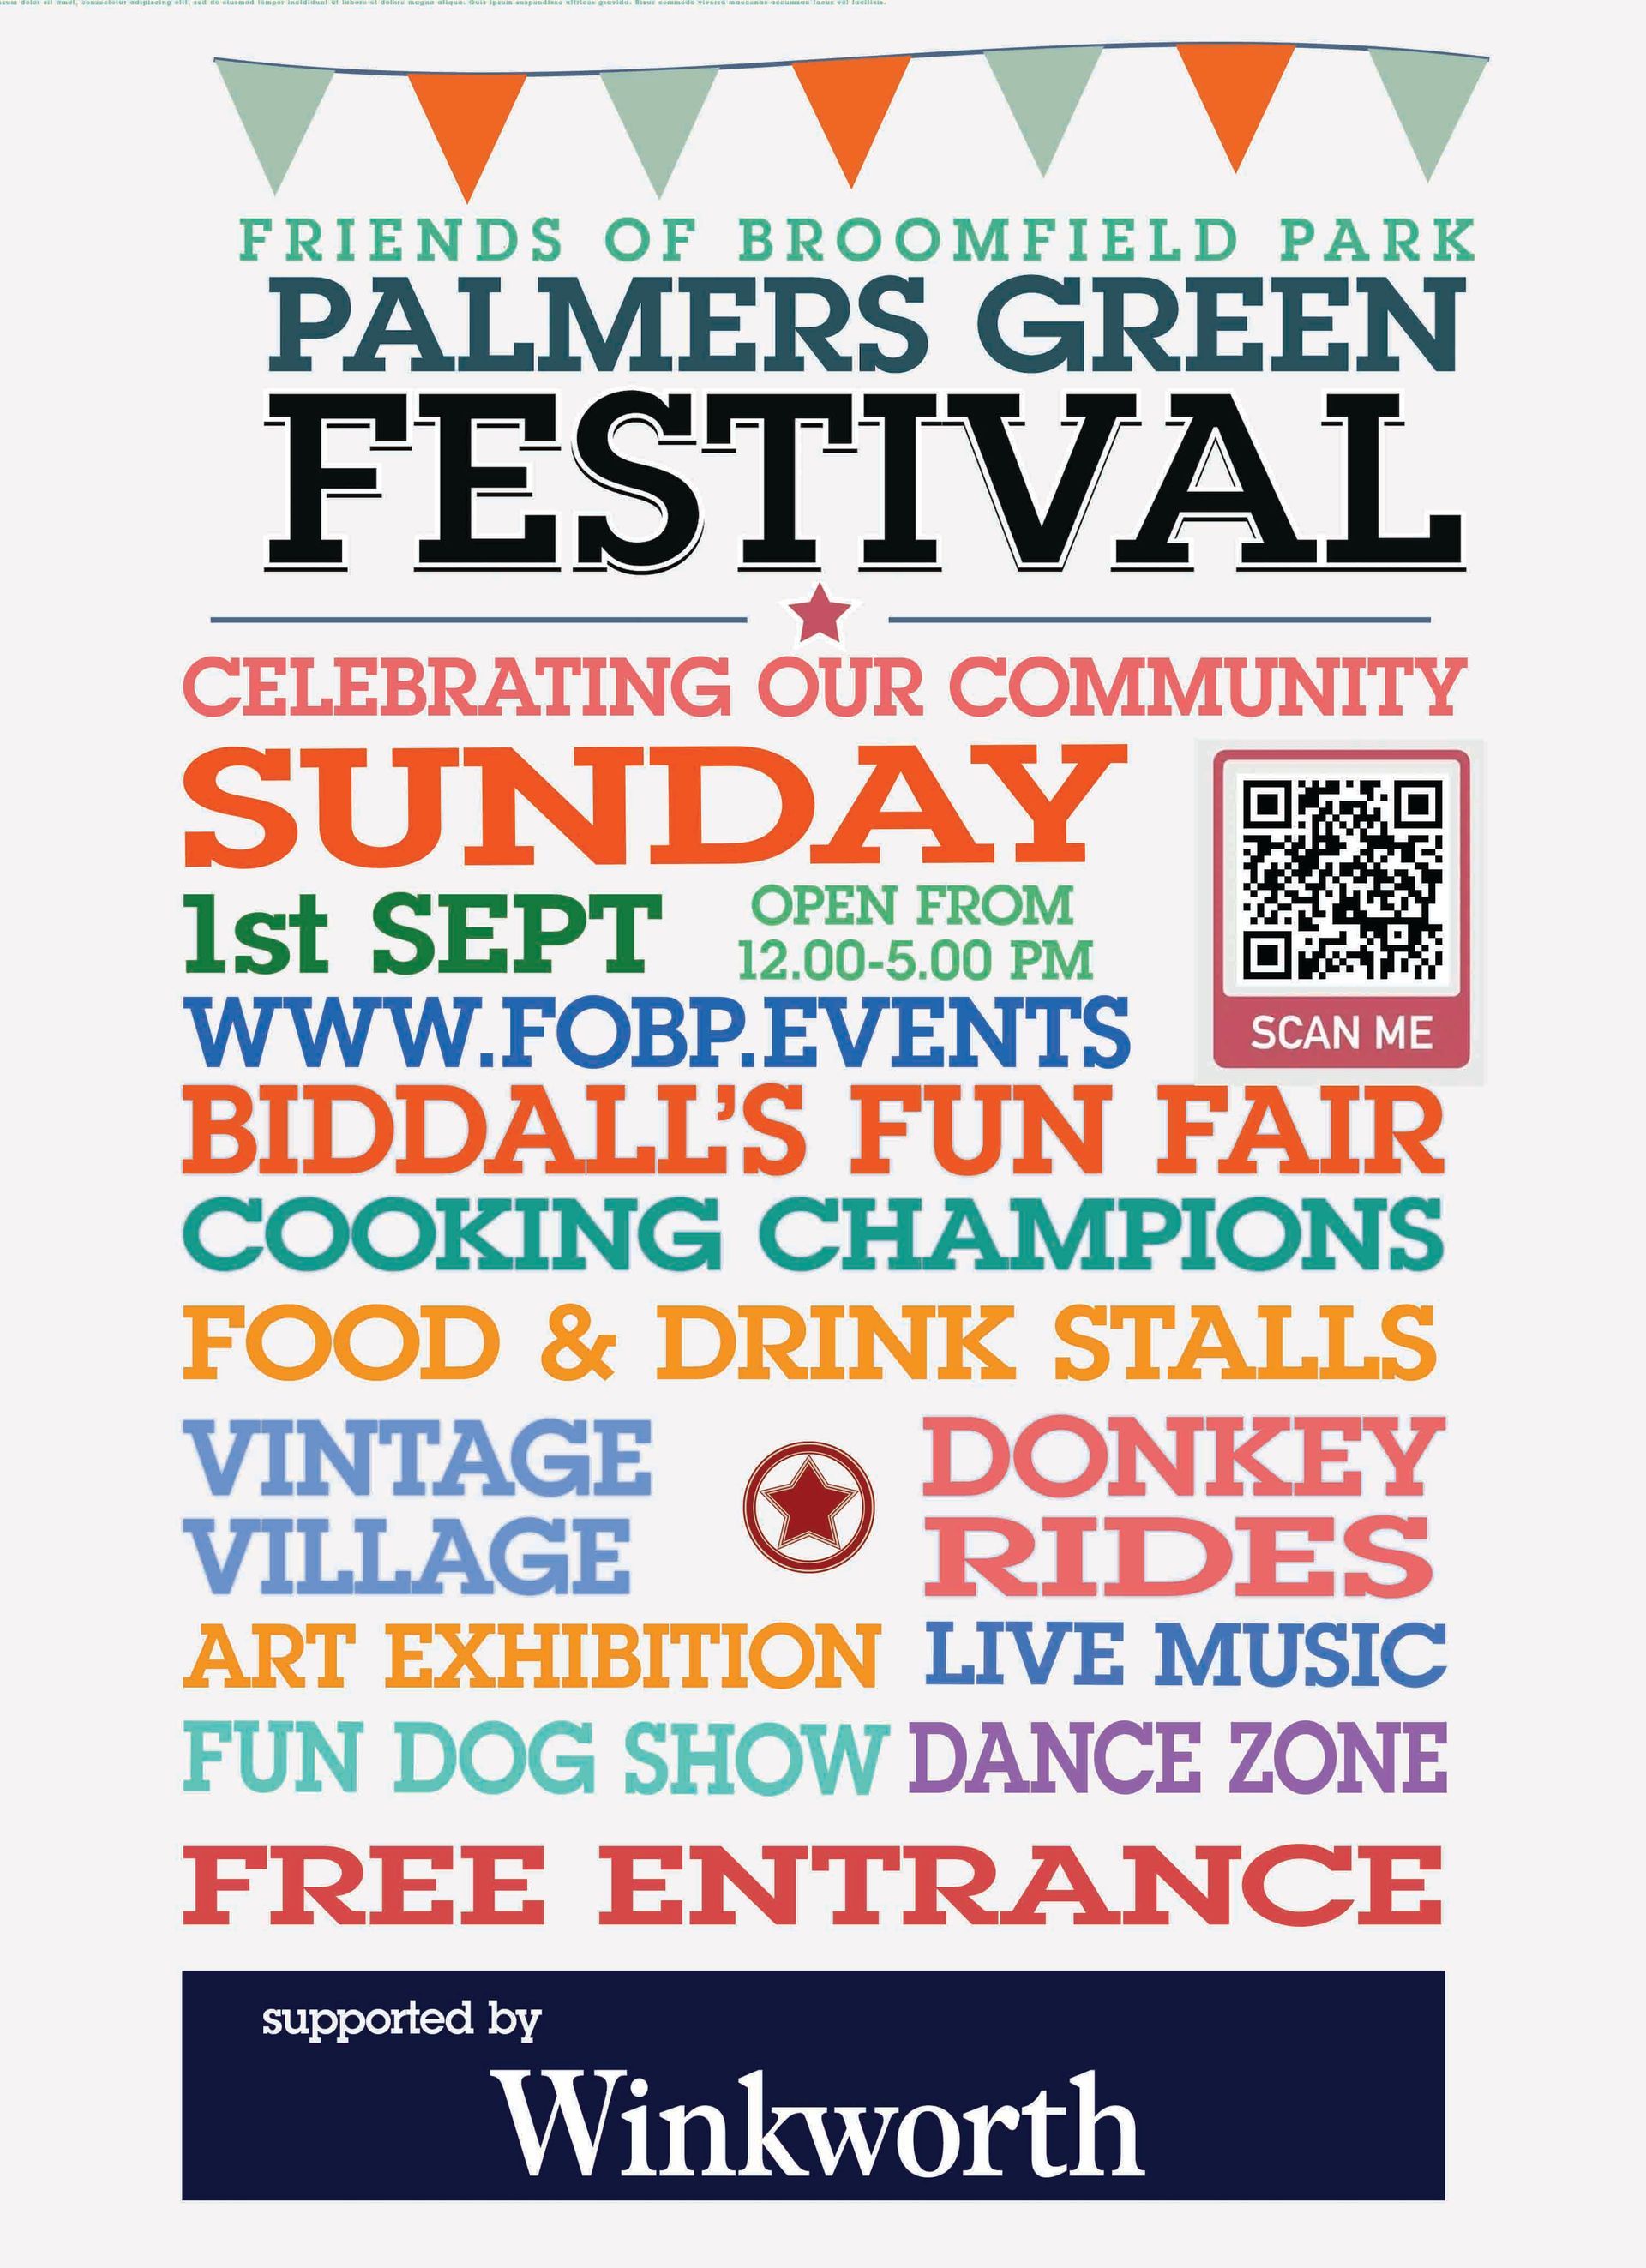 A poster for the friends of broomfield park palmers green festival